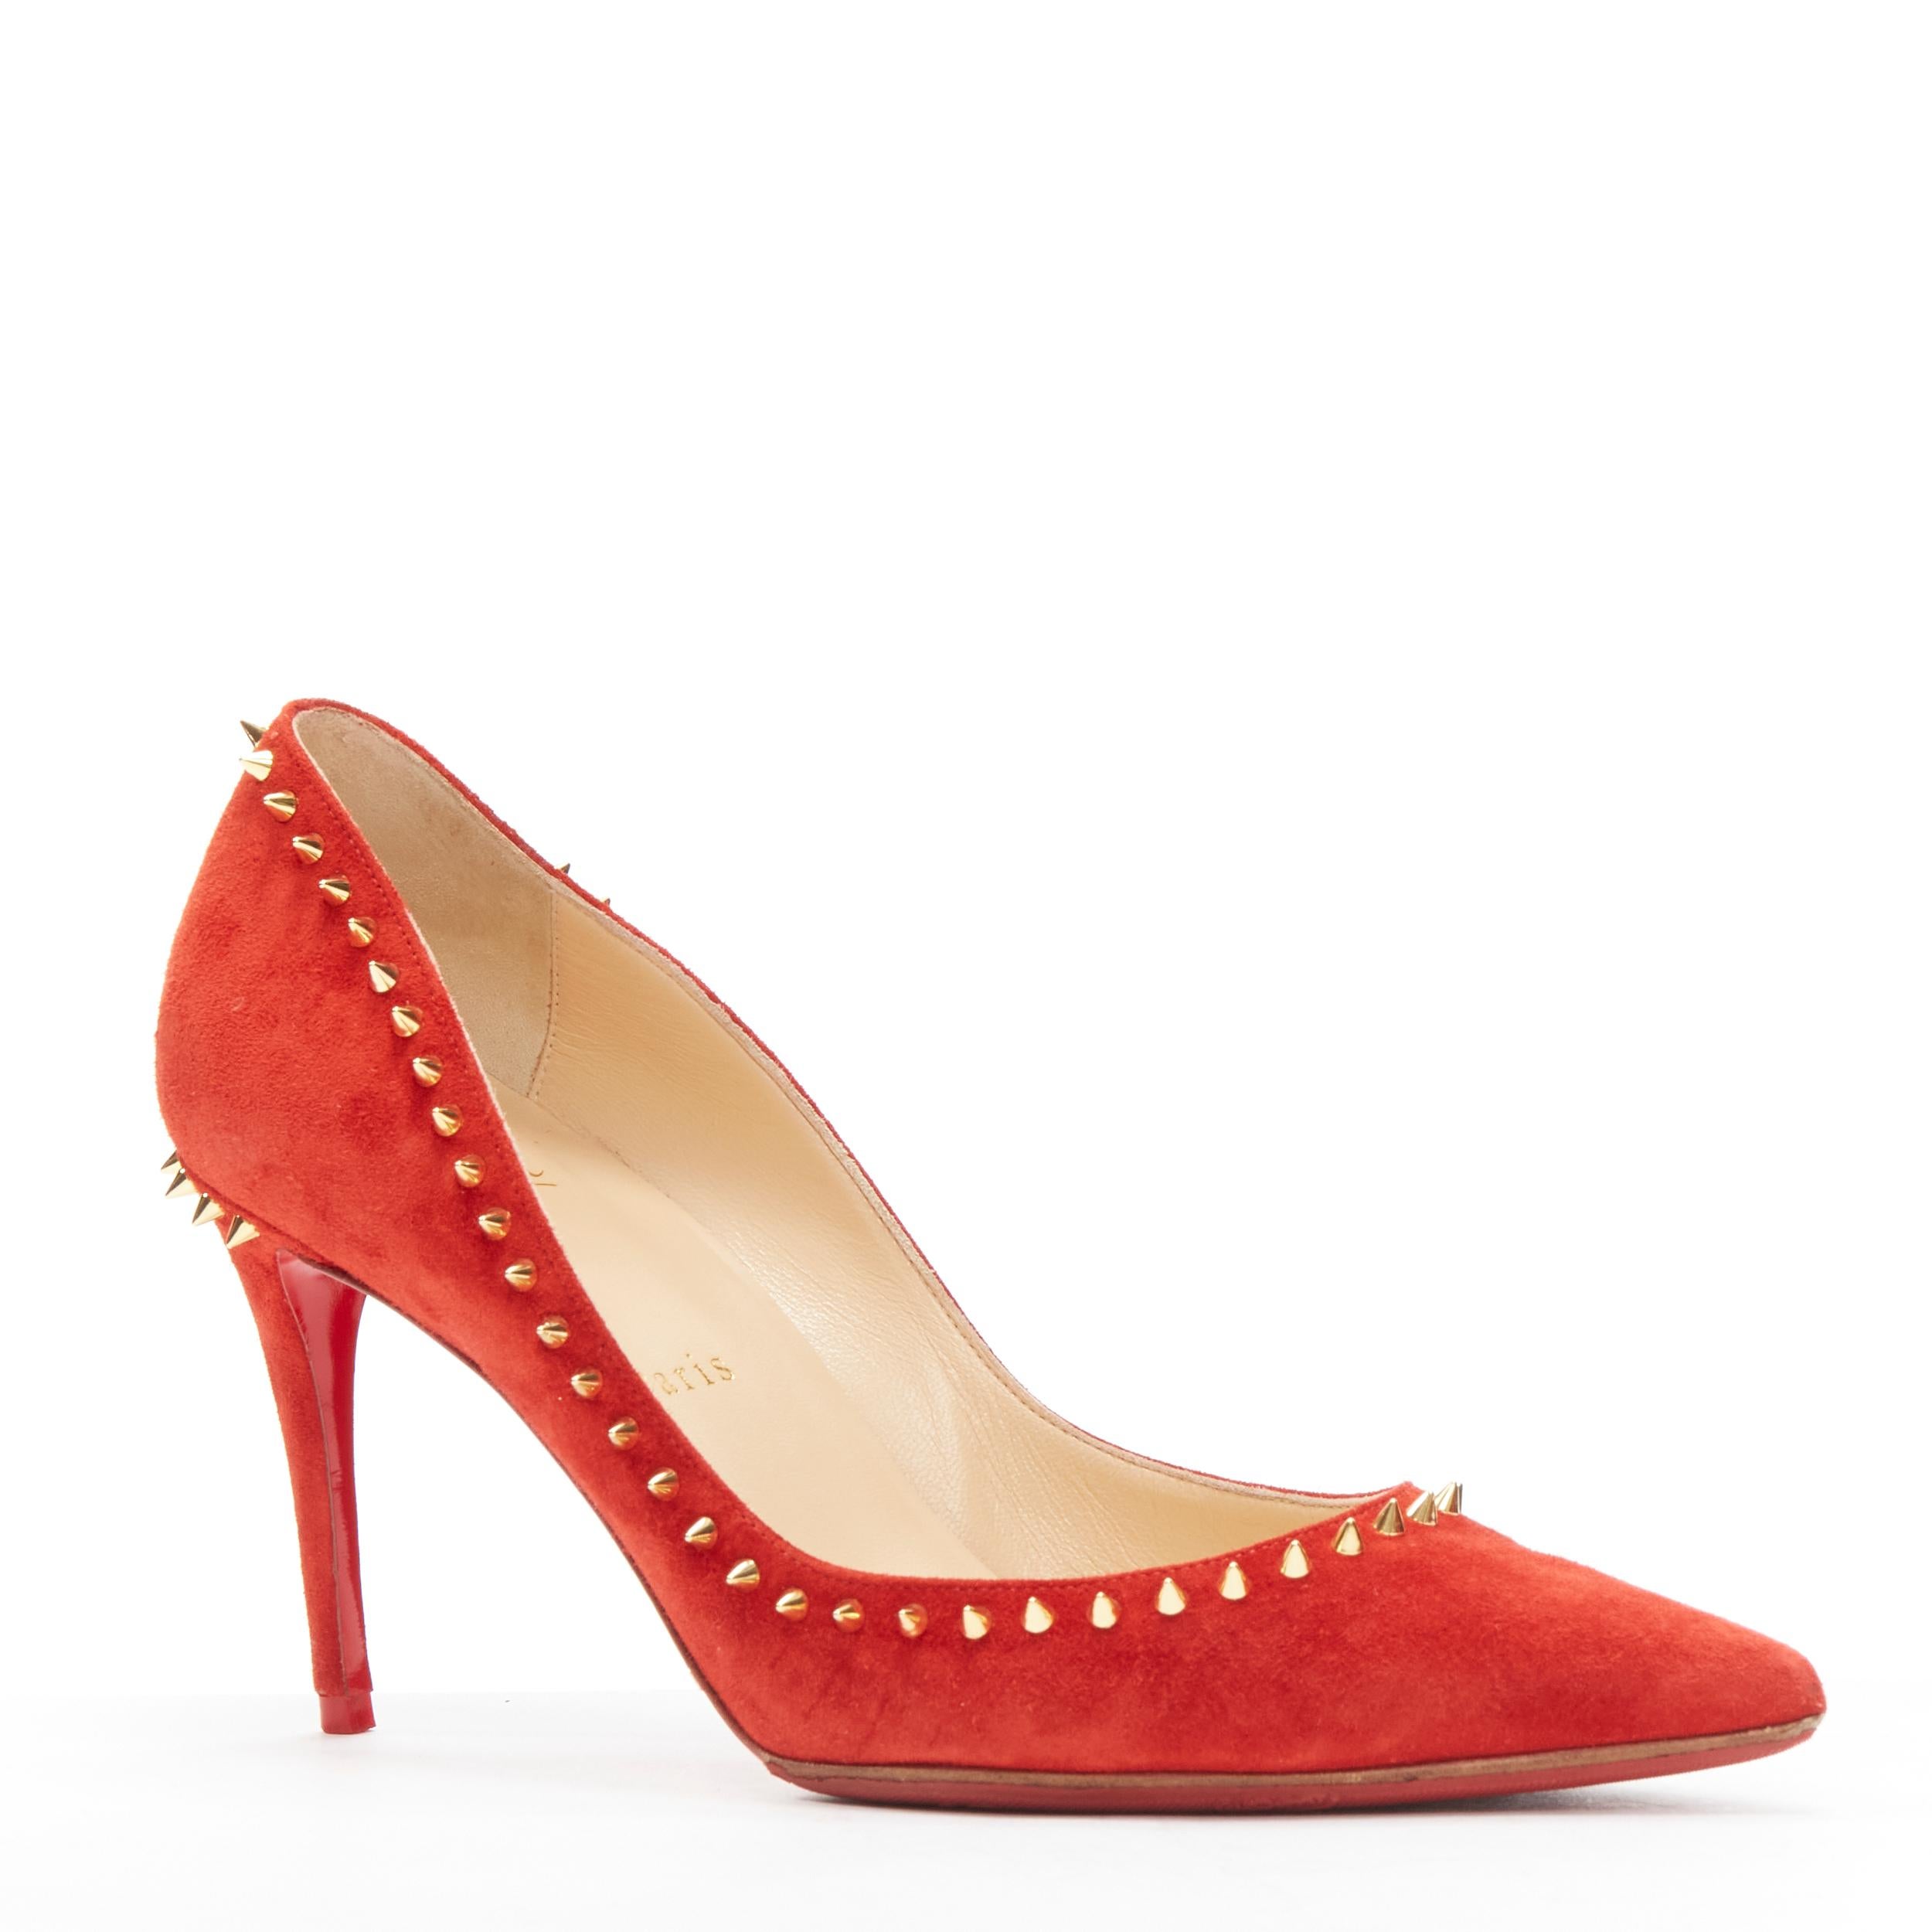 CHRISTIAN LOUBOUTIN Anjalina 85 red suede gold spike stud high heel pumps EU37
Reference: TGAS/D00169
Brand: Christian Louboutin
Model: Anjalina 85
Material: Suede
Color: Red, Gold
Pattern: Solid
Closure: Slip On
Lining: Nude Leather
Extra Details: